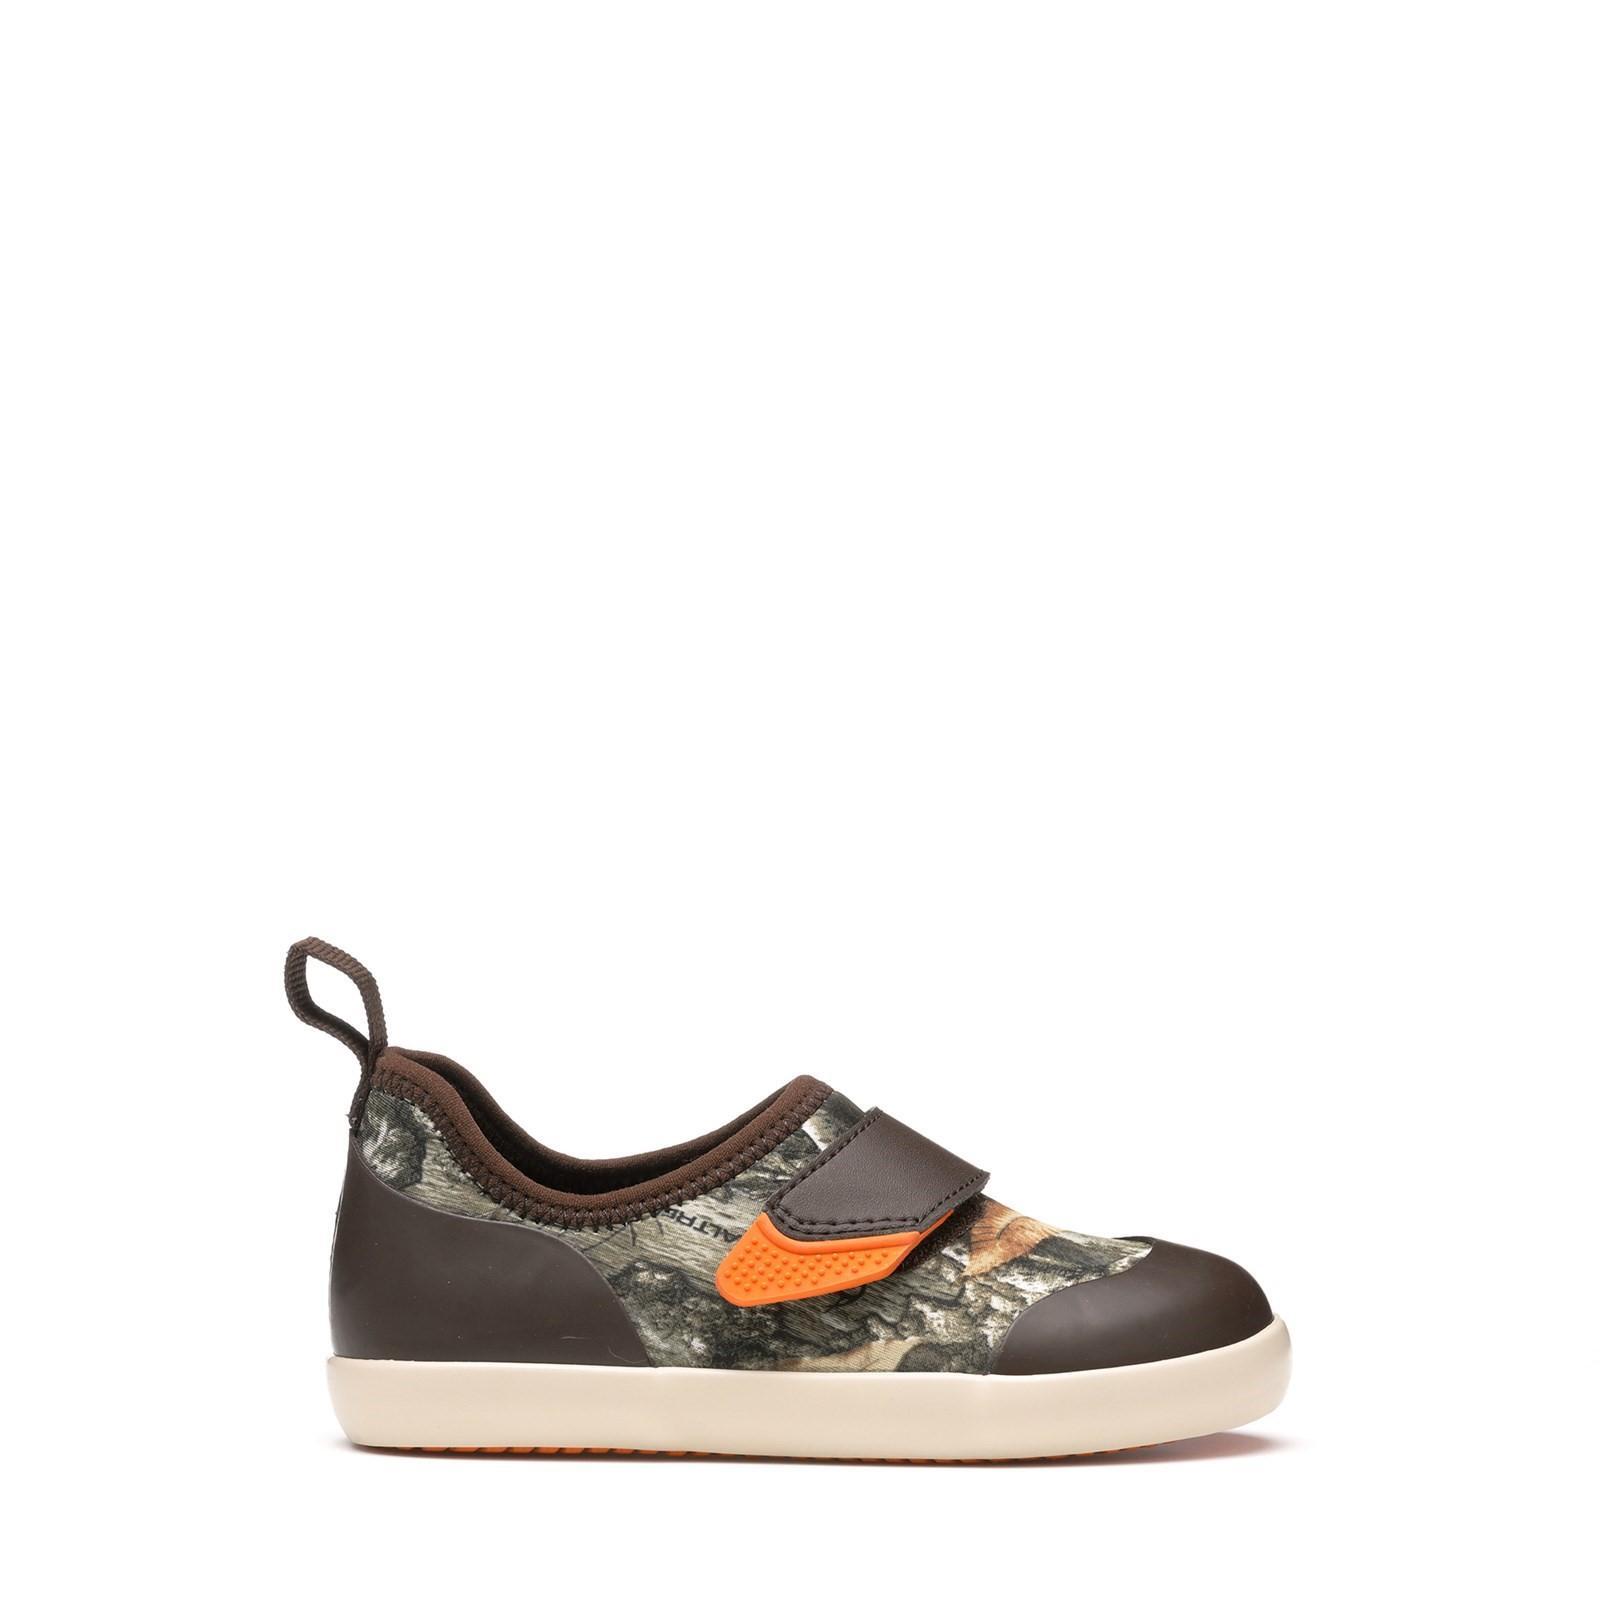 Childrens/Kids Summer Solstice Camo Trainers (Brown) 4/5